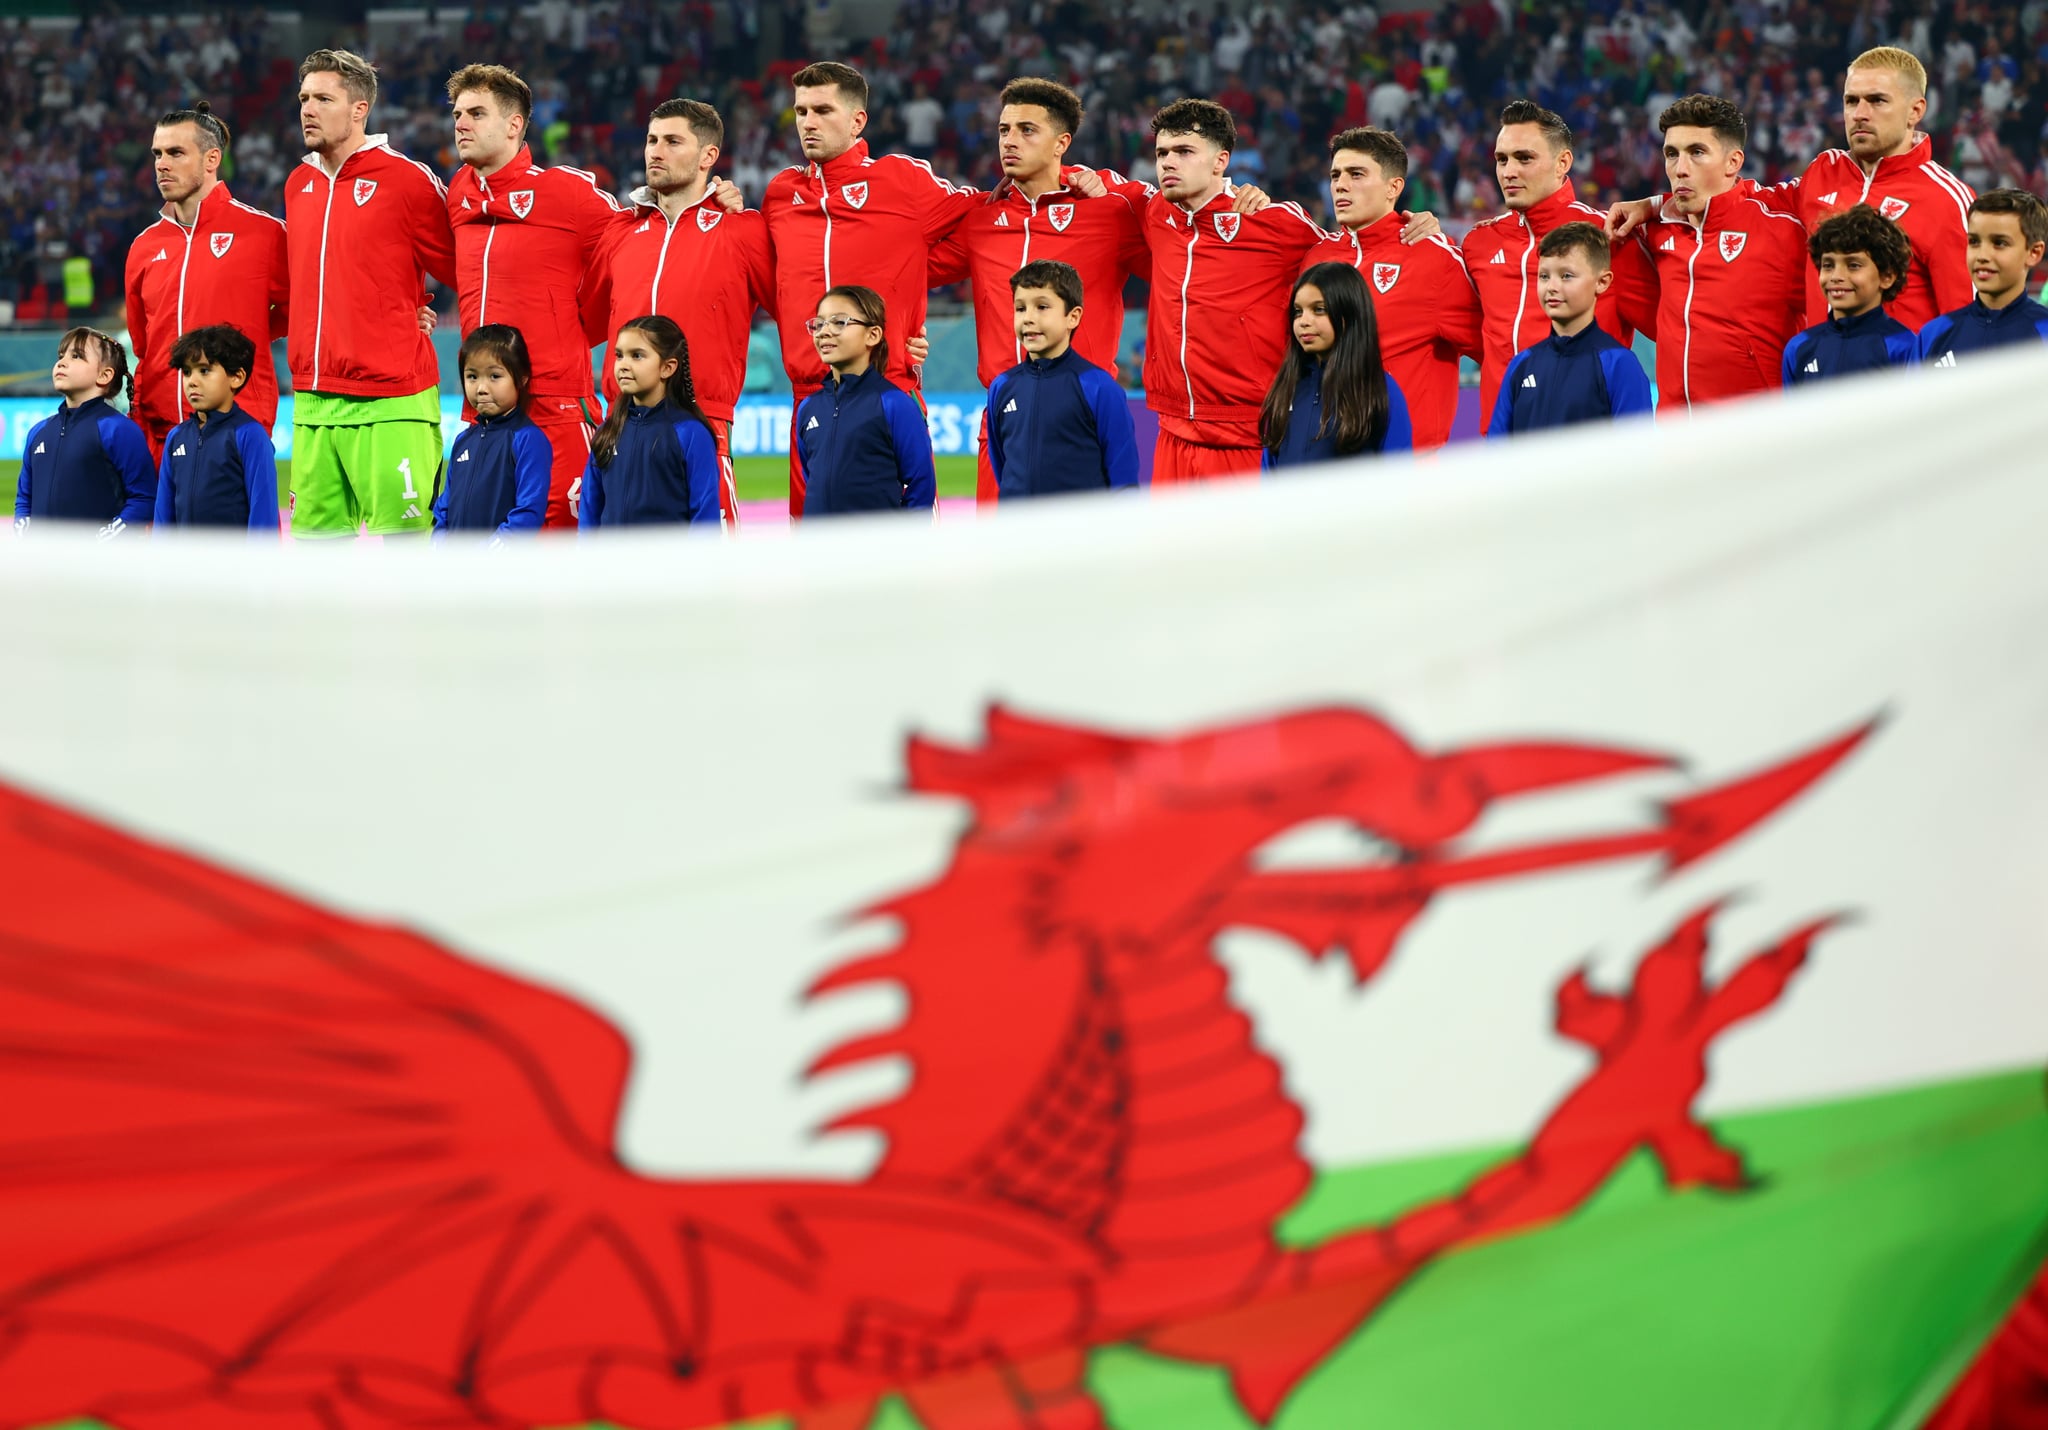 November 21, 2022, Qatar, Ar-Rayyan: Soccer: World Cup, USA - Wales, Preliminary Round, Group B, Matchday 1, Ahmed bin Ali Stadium, Wales players stand behind the Welsh flag with accompanying children before the start of the game.  Photo: Tom Weller/dpa (Photo by Tom Weller/Picture Alliance via Getty Images)